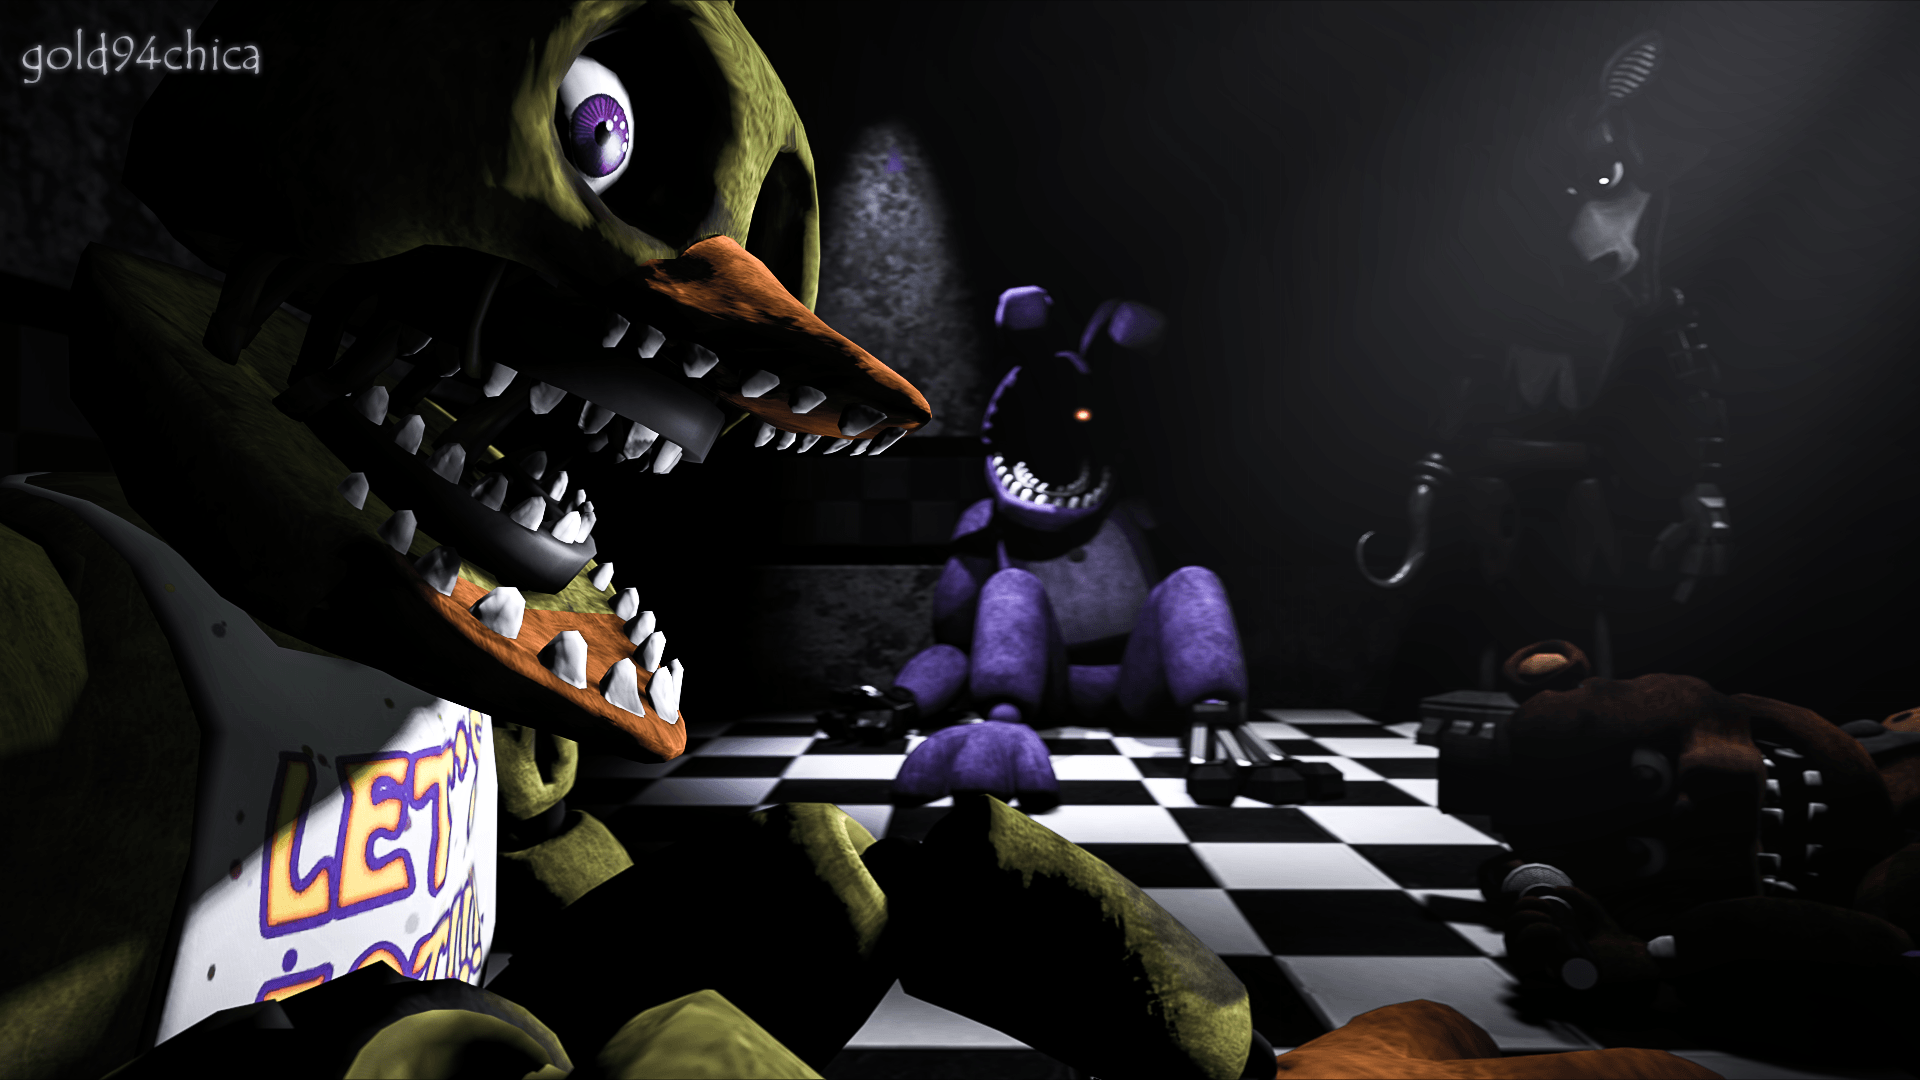 Video Game Five Nights At Freddy's 2 HD Wallpaper by 河CY